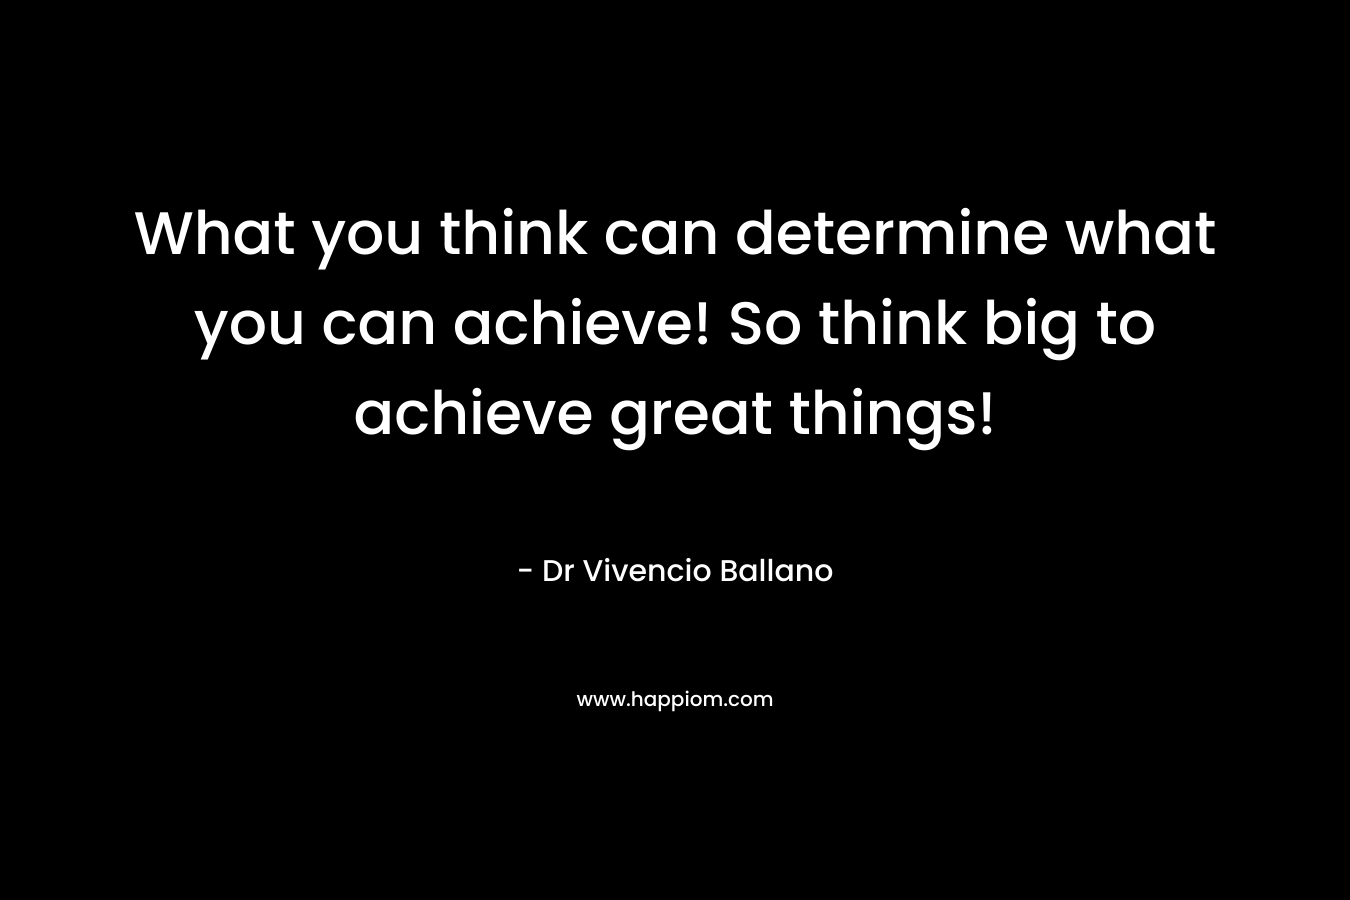 What you think can determine what you can achieve! So think big to achieve great things!